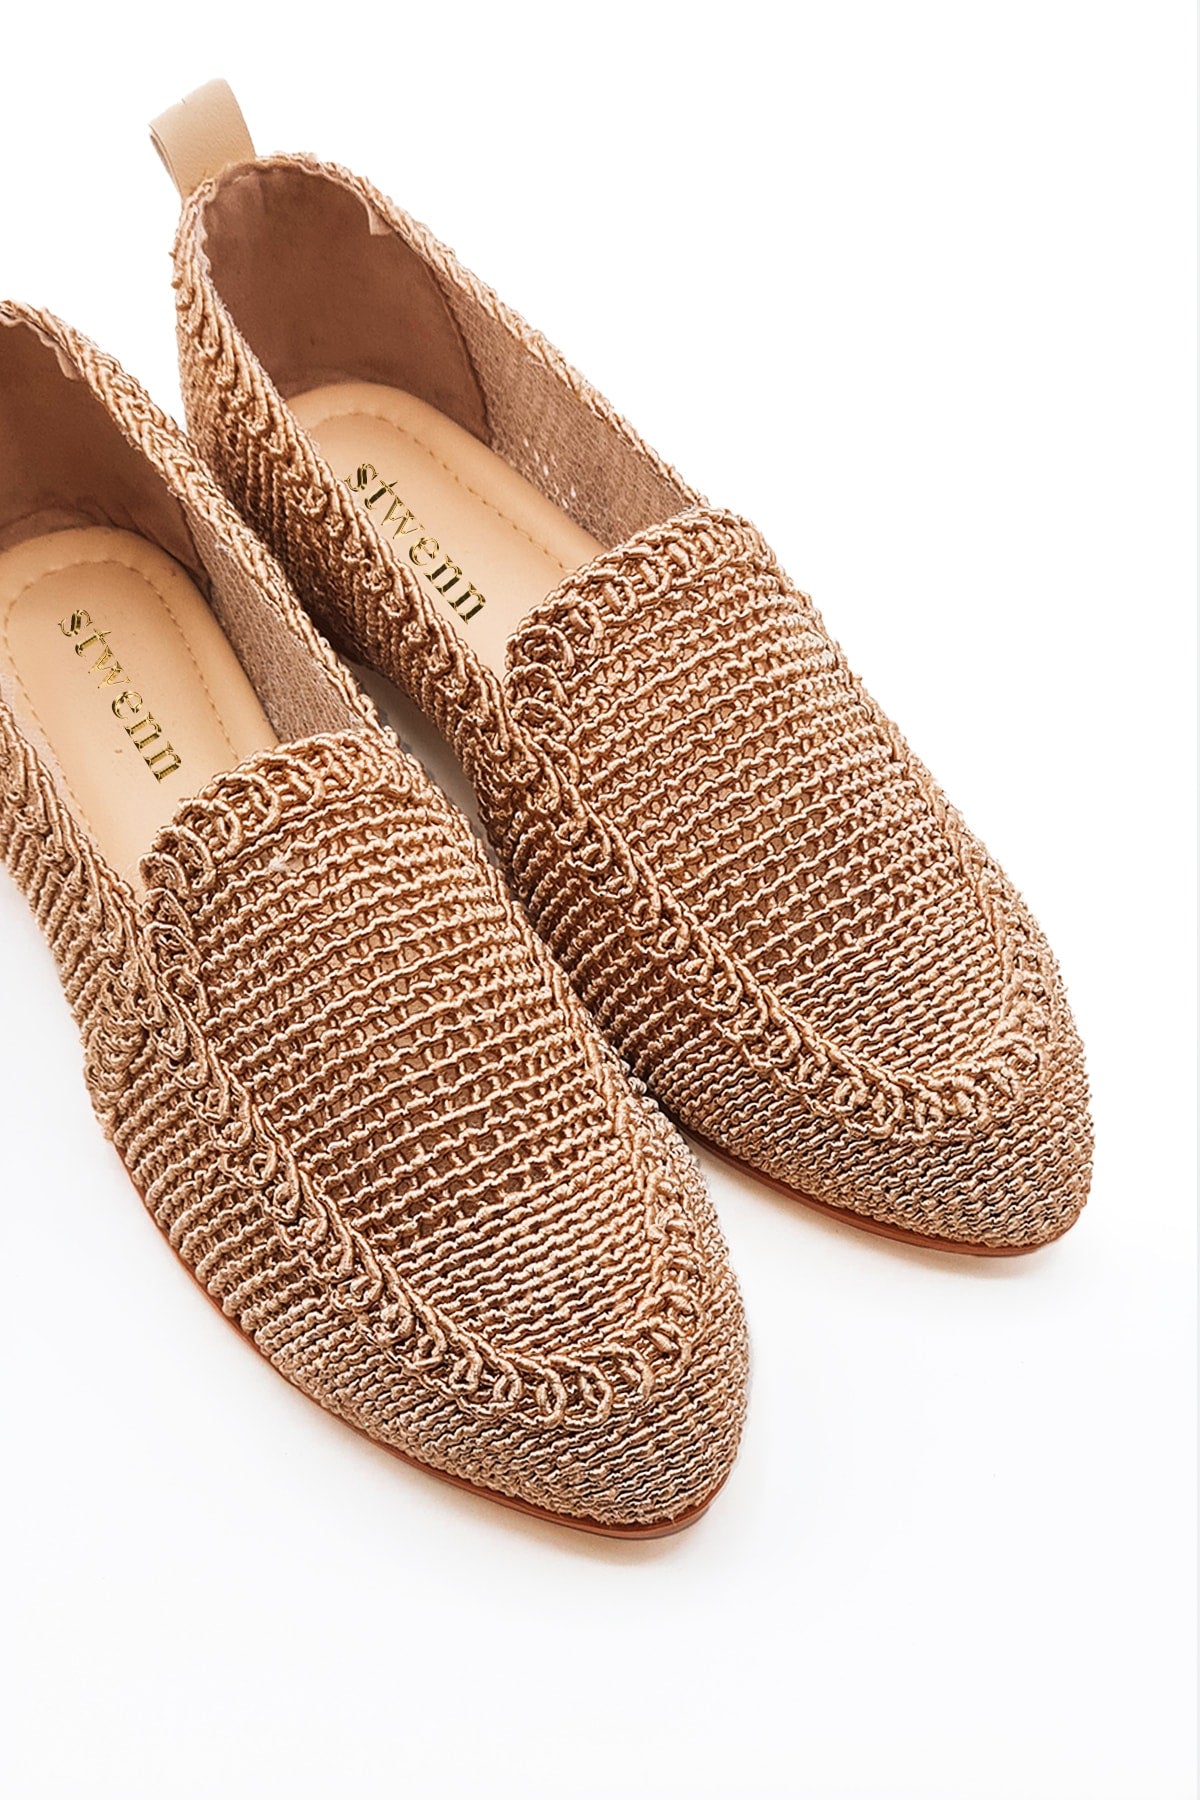 Women's Knitted Flat Shoes Women's Shoes Casual Shoes Mink